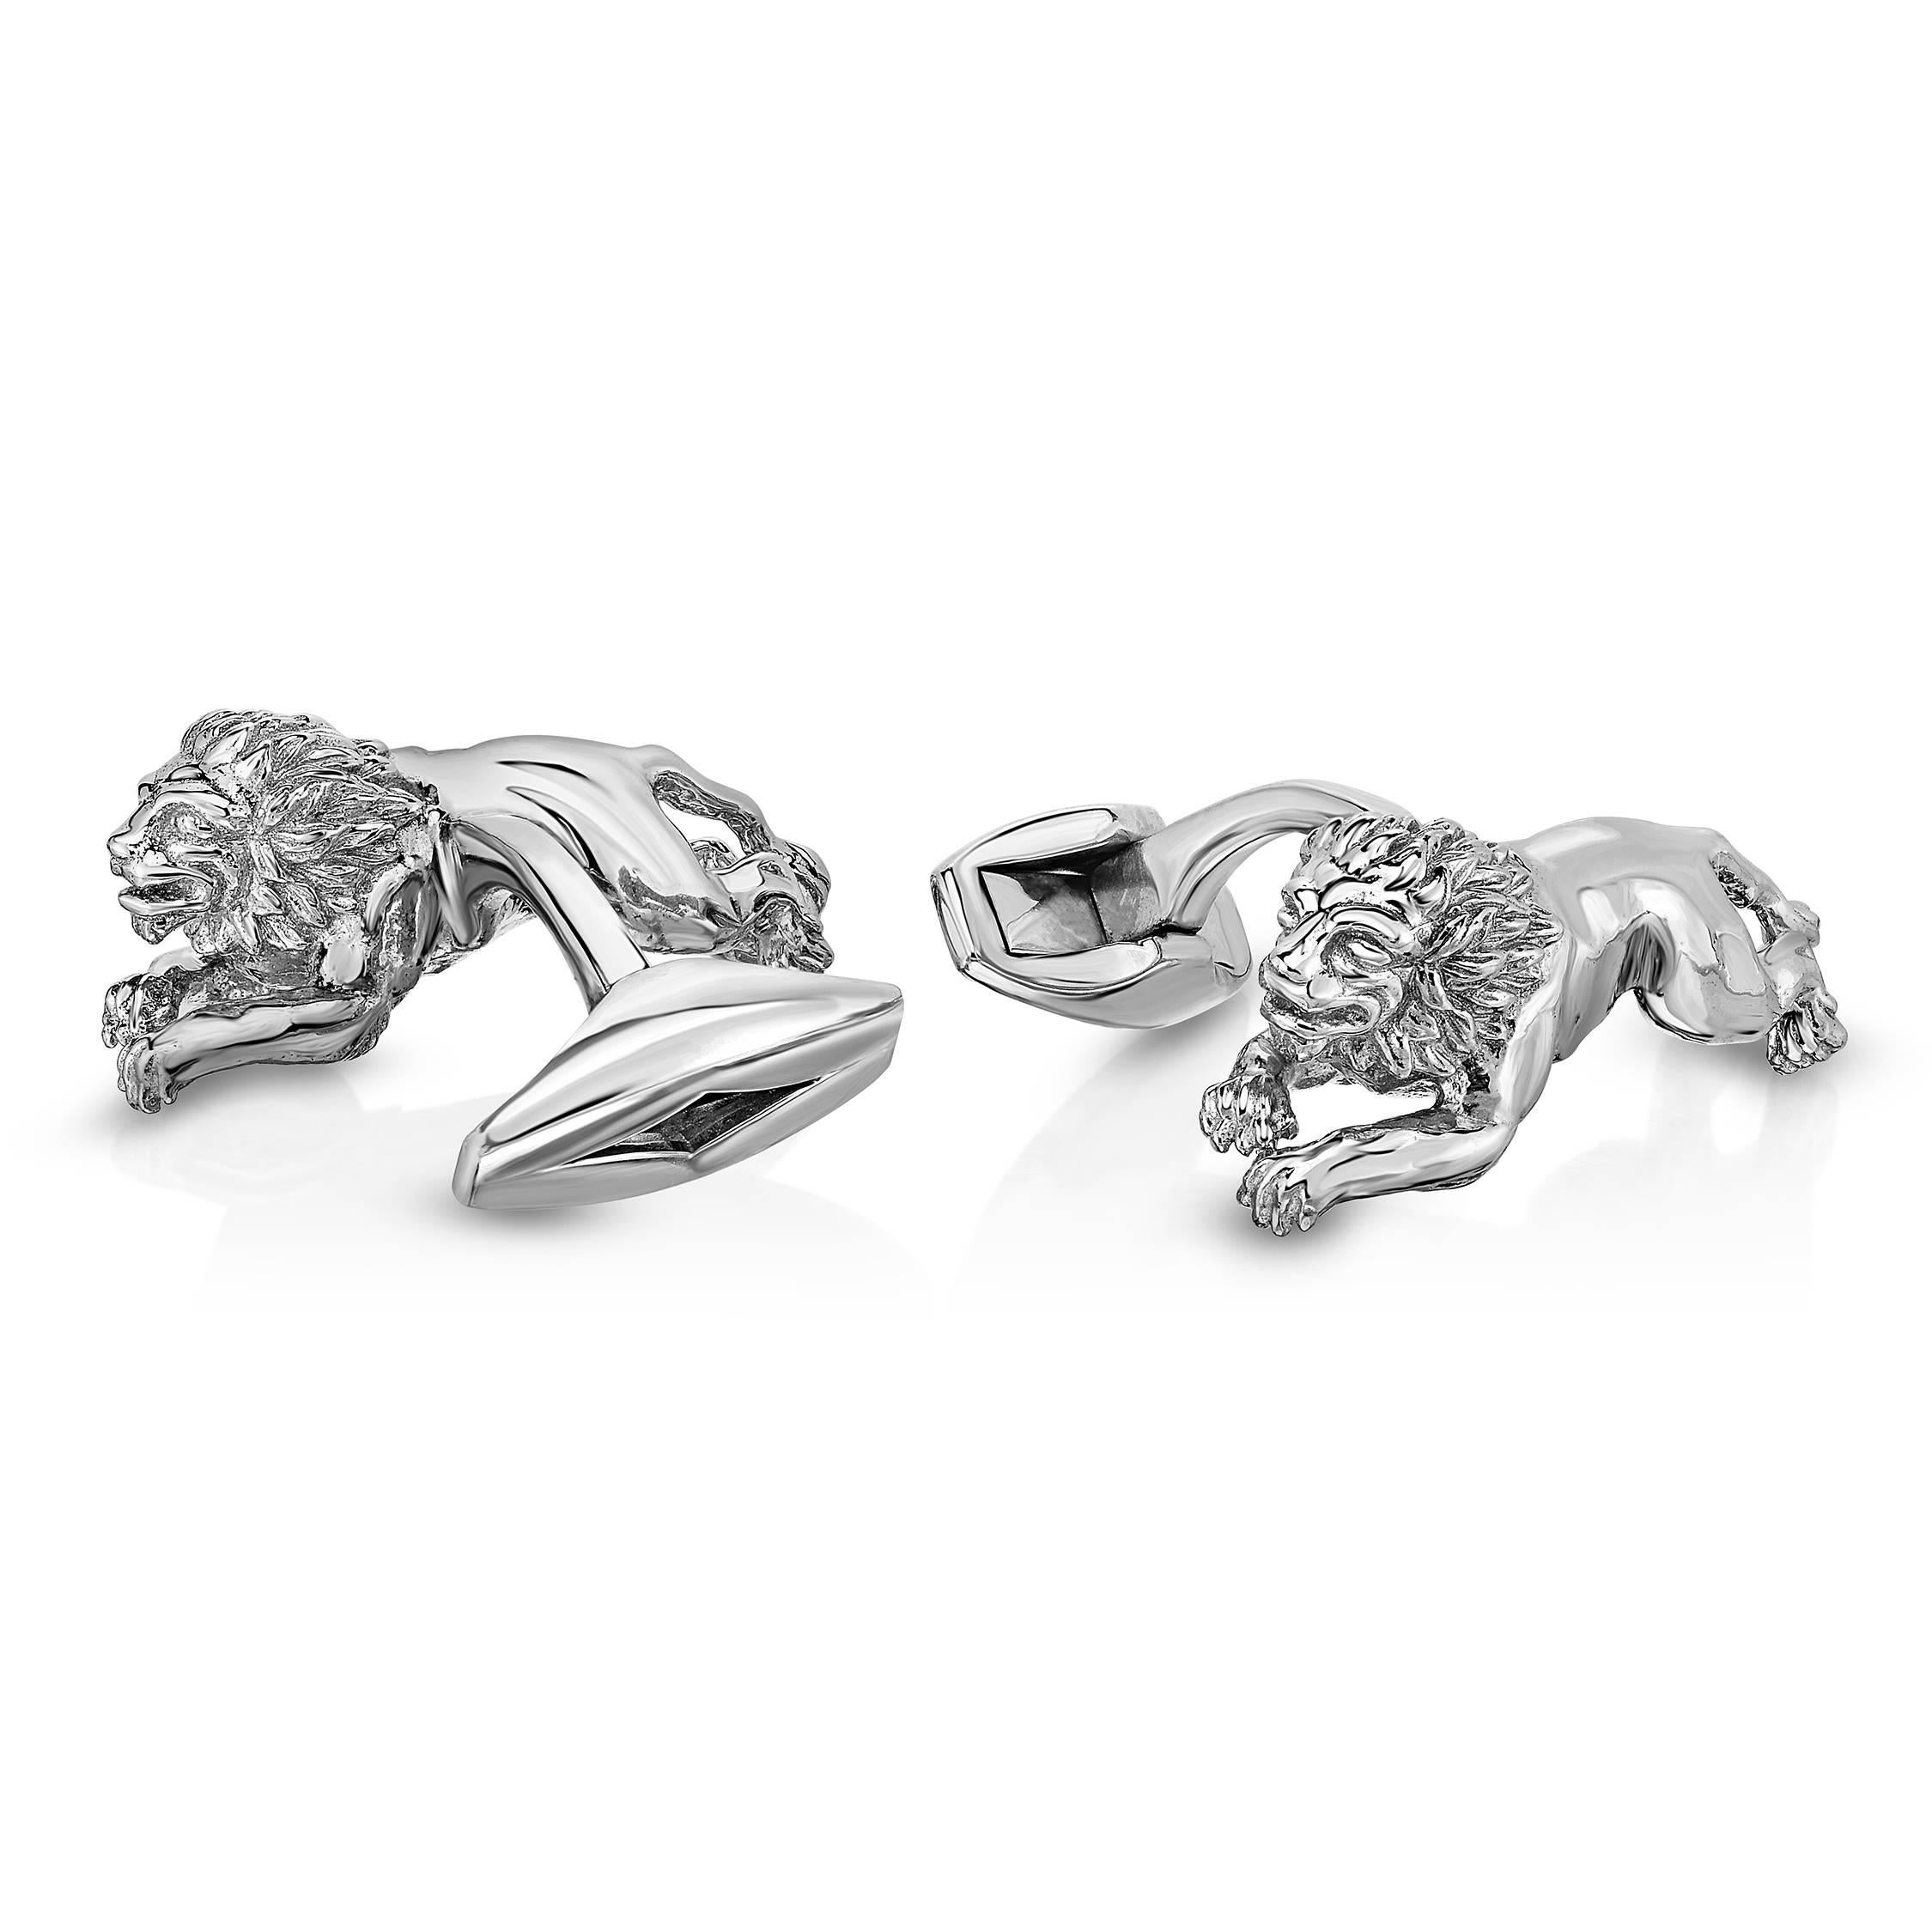 Sterling Silver and Diamond cufflinks hand crafted in New York City. Perfect as a Father's Day gift or for any cufflink lover in your life. 

These Sterling Silver cufflinks were three dimensionally carved by a master jeweler. The Diamond eyes were